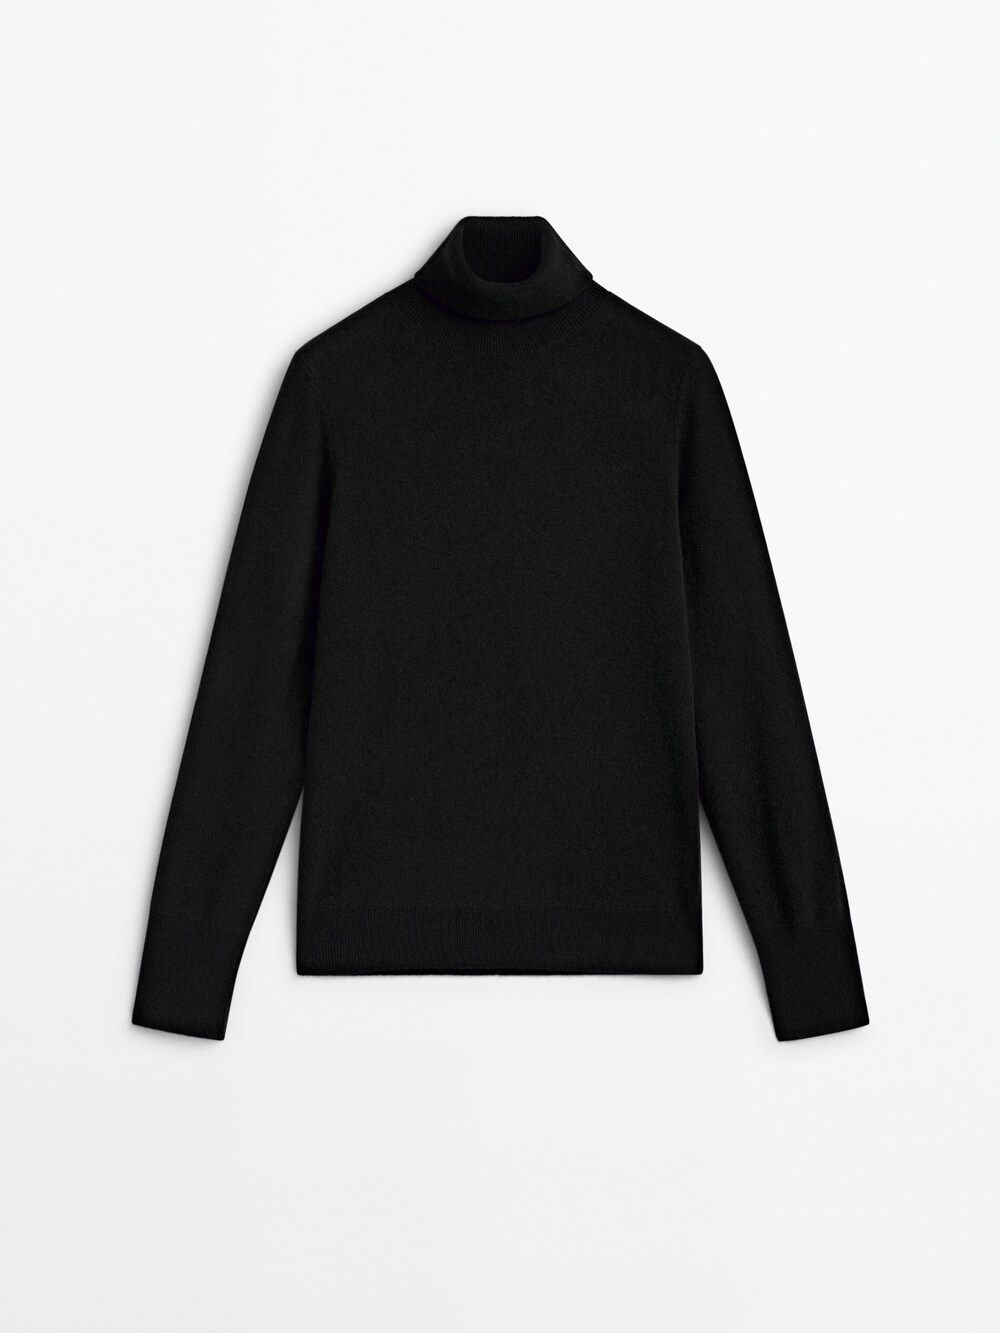 Wool and cashmere blend high neck sweater | Massimo Dutti (US)